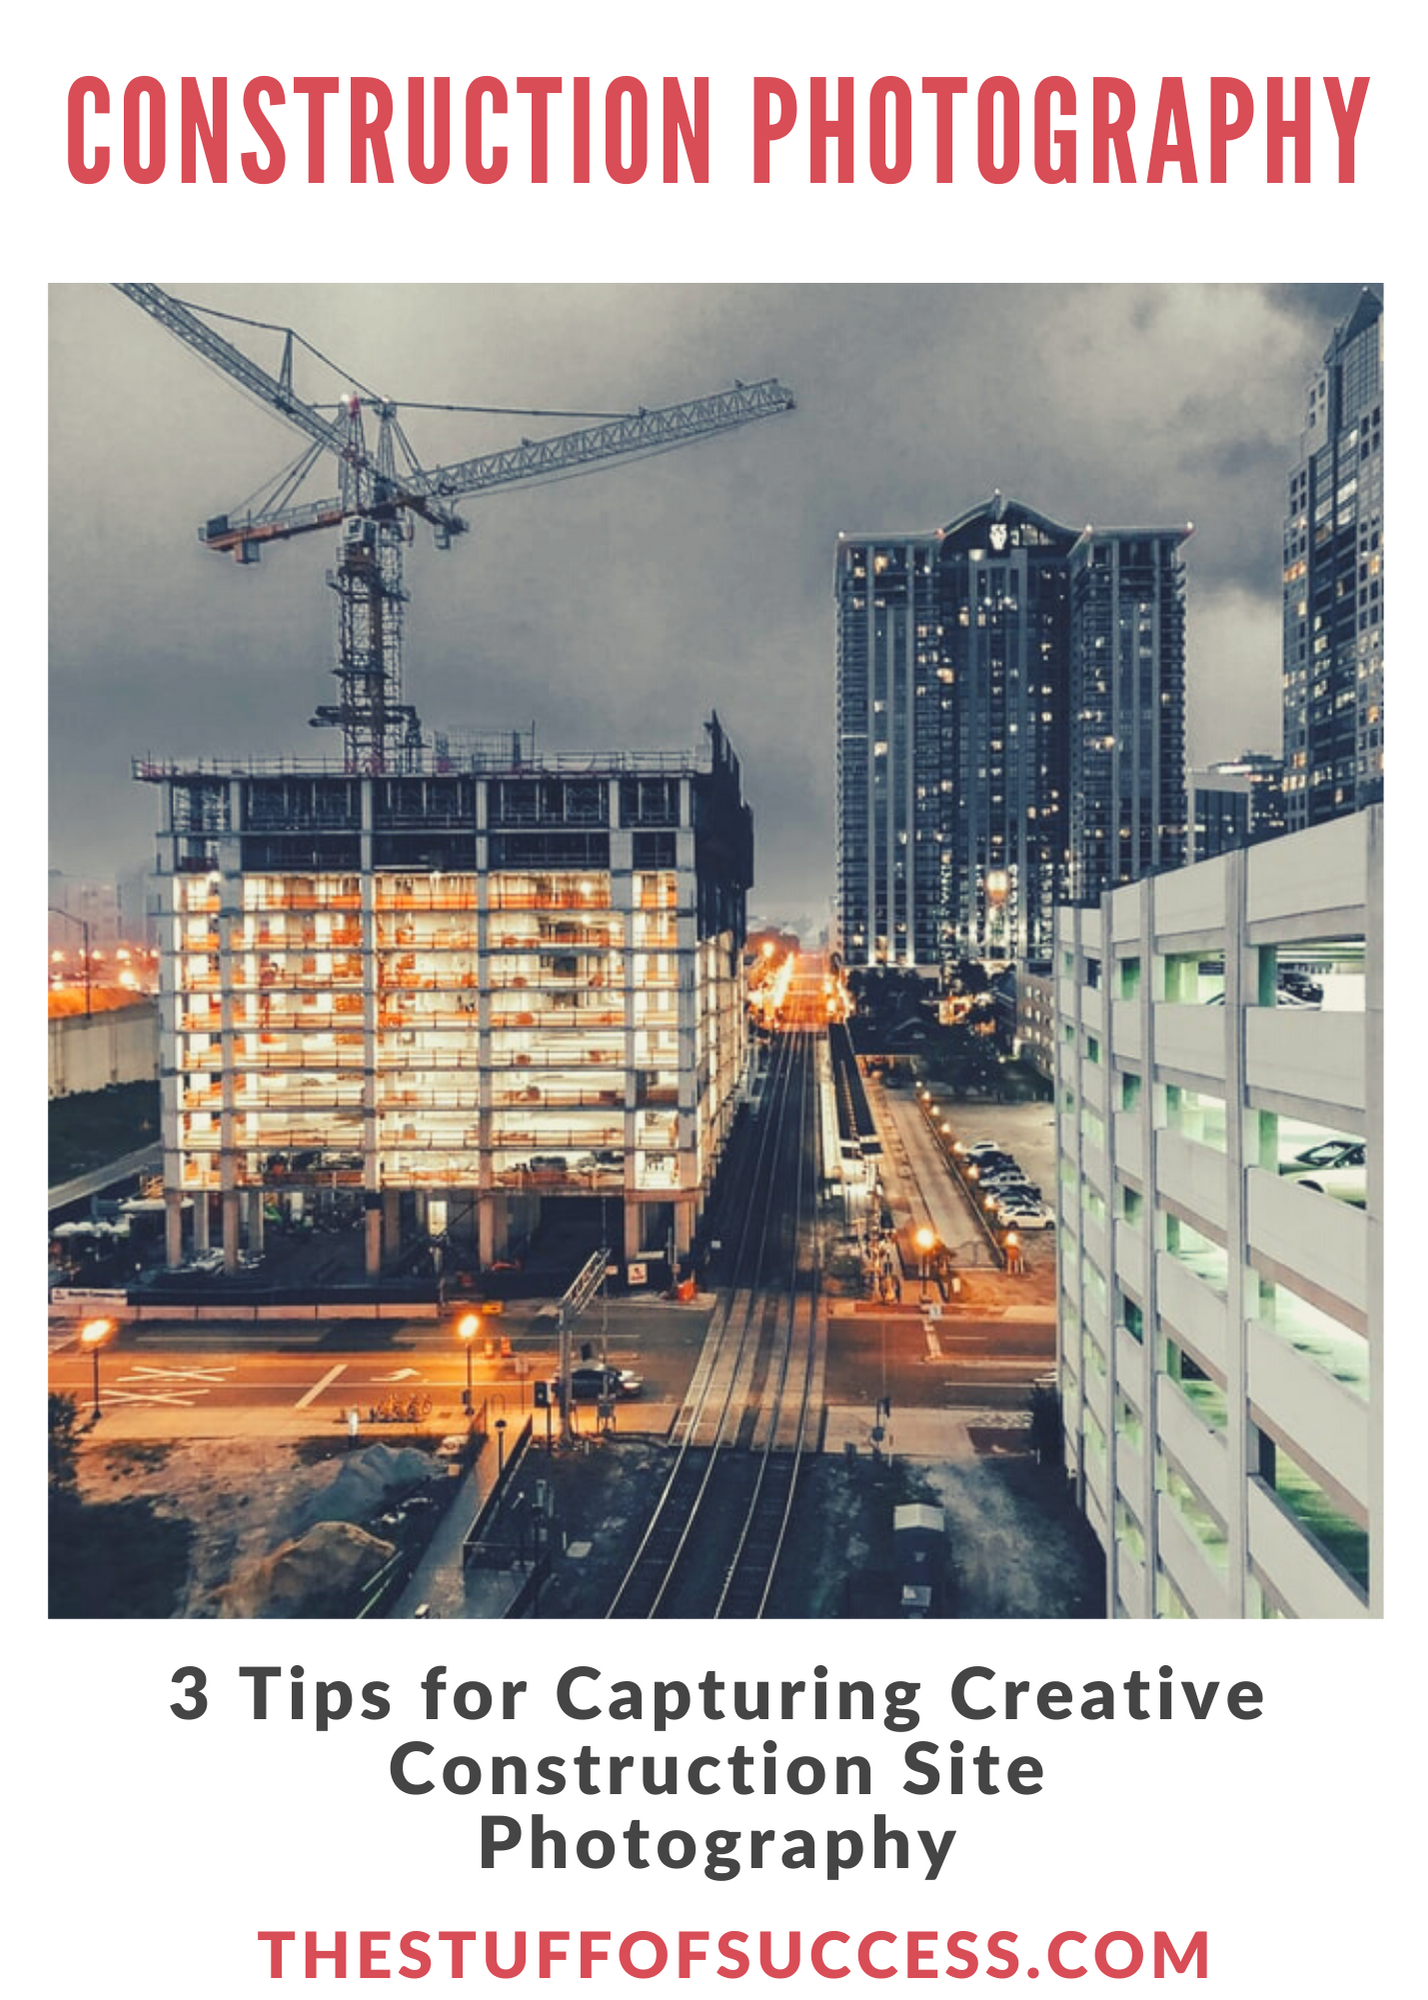 3 Tips for Capturing Creative Construction Site Photography